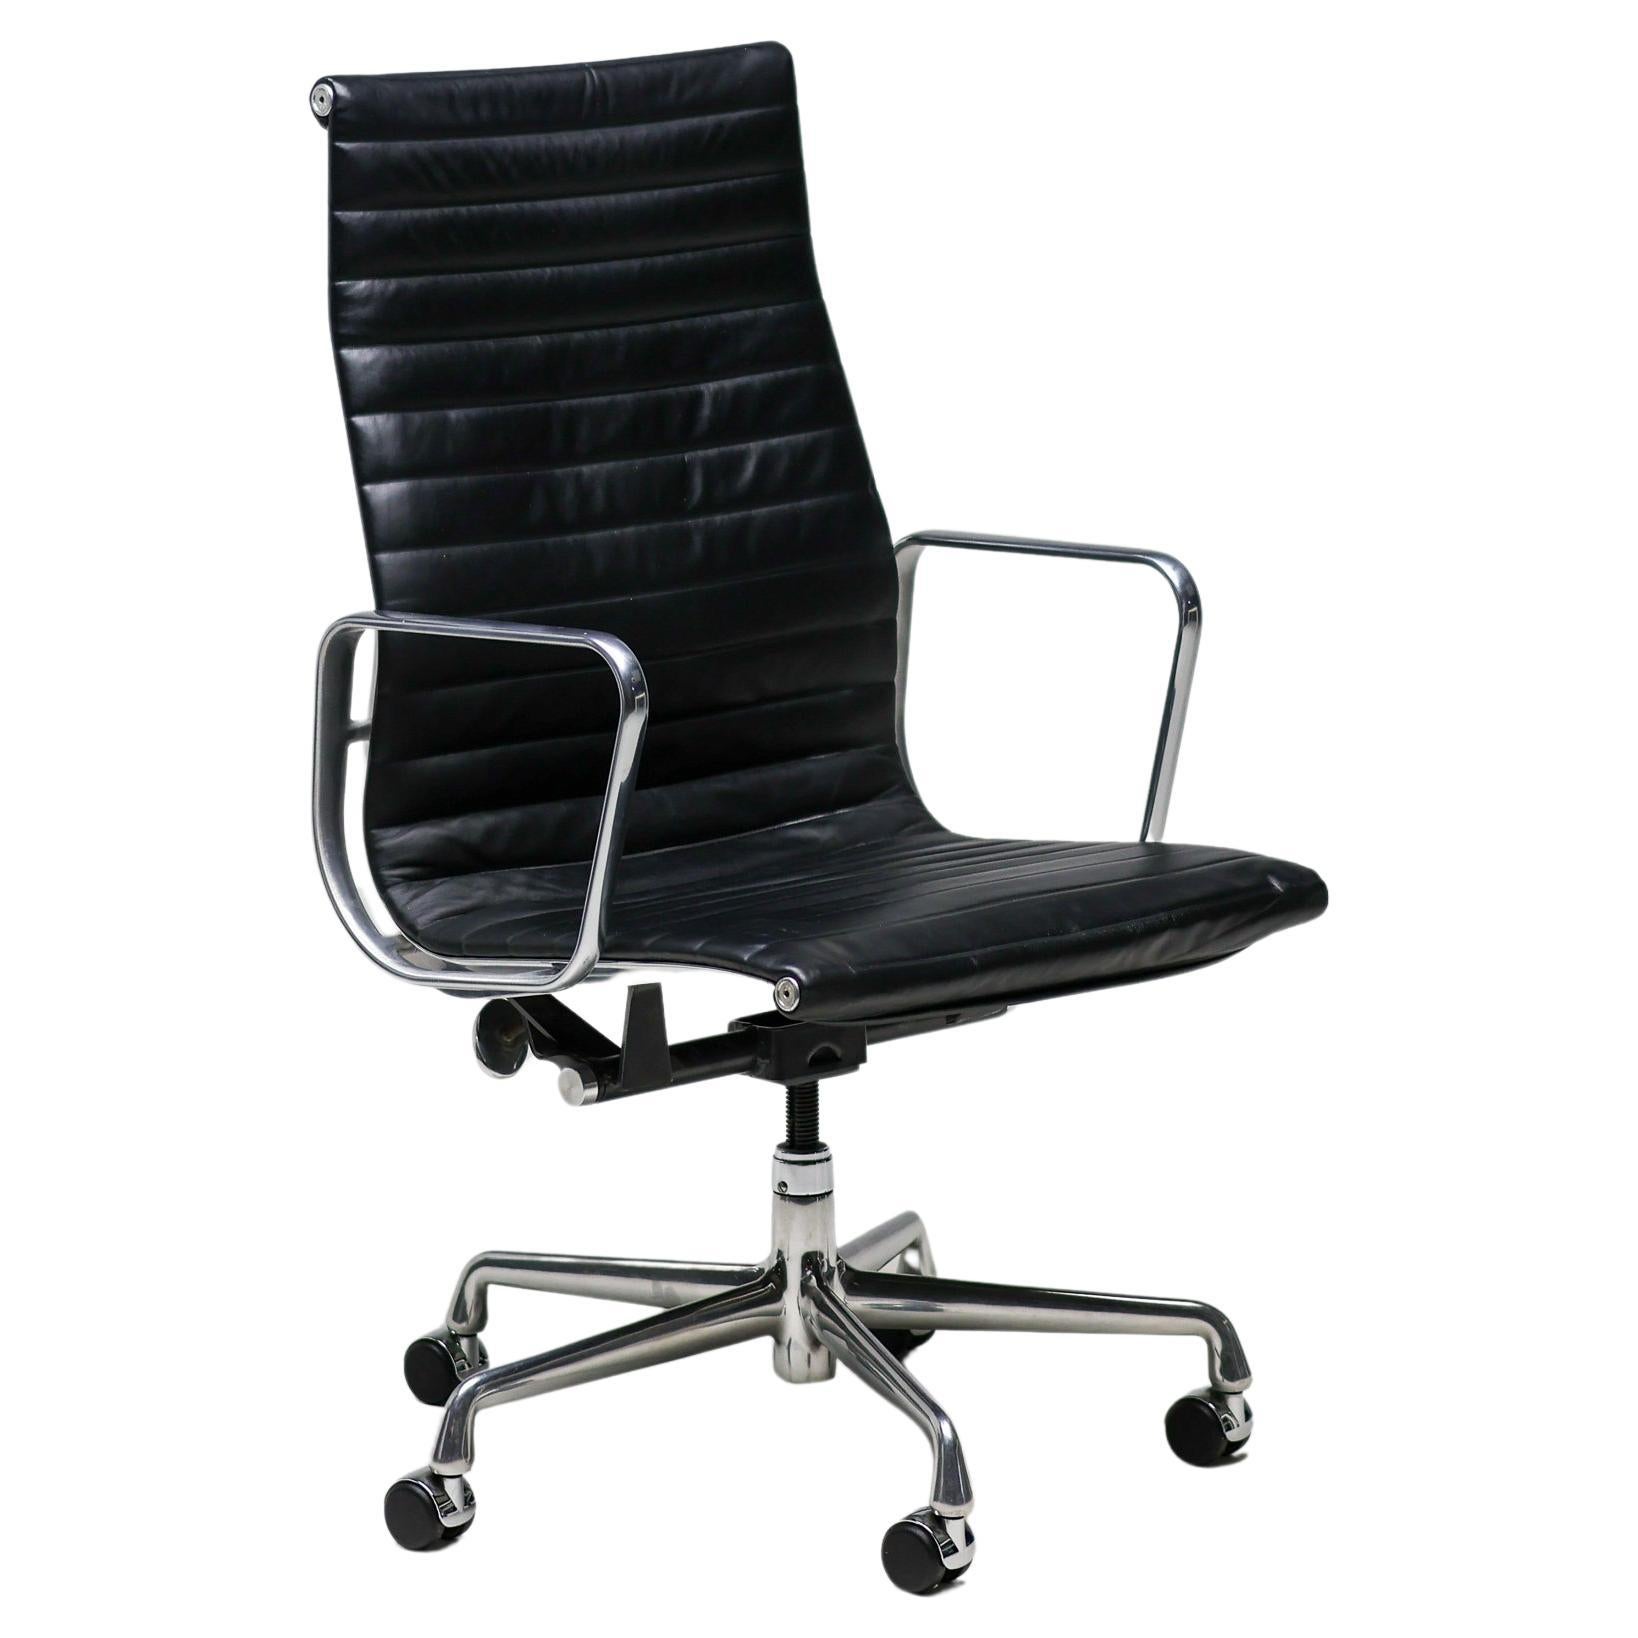 Charles and Ray Eames EA119 Black Leather Executive Desk Chair by Herman Miller (en anglais) en vente